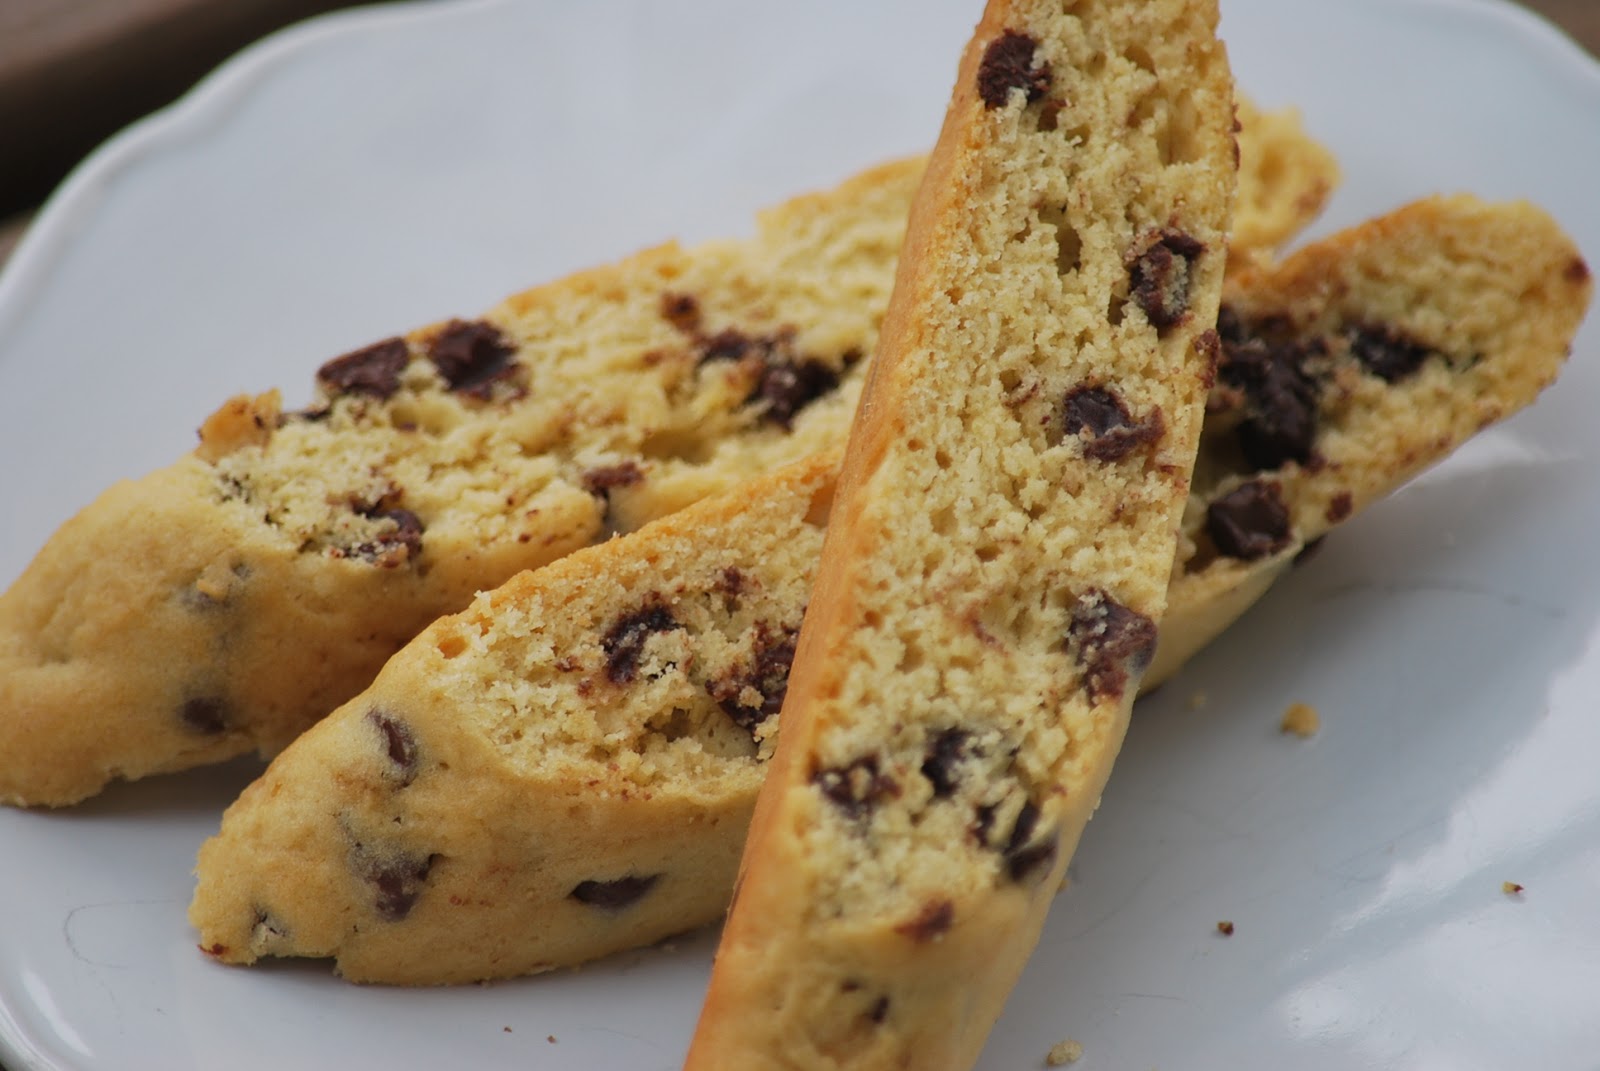 My story in recipes: Chocolate Chip Biscotti